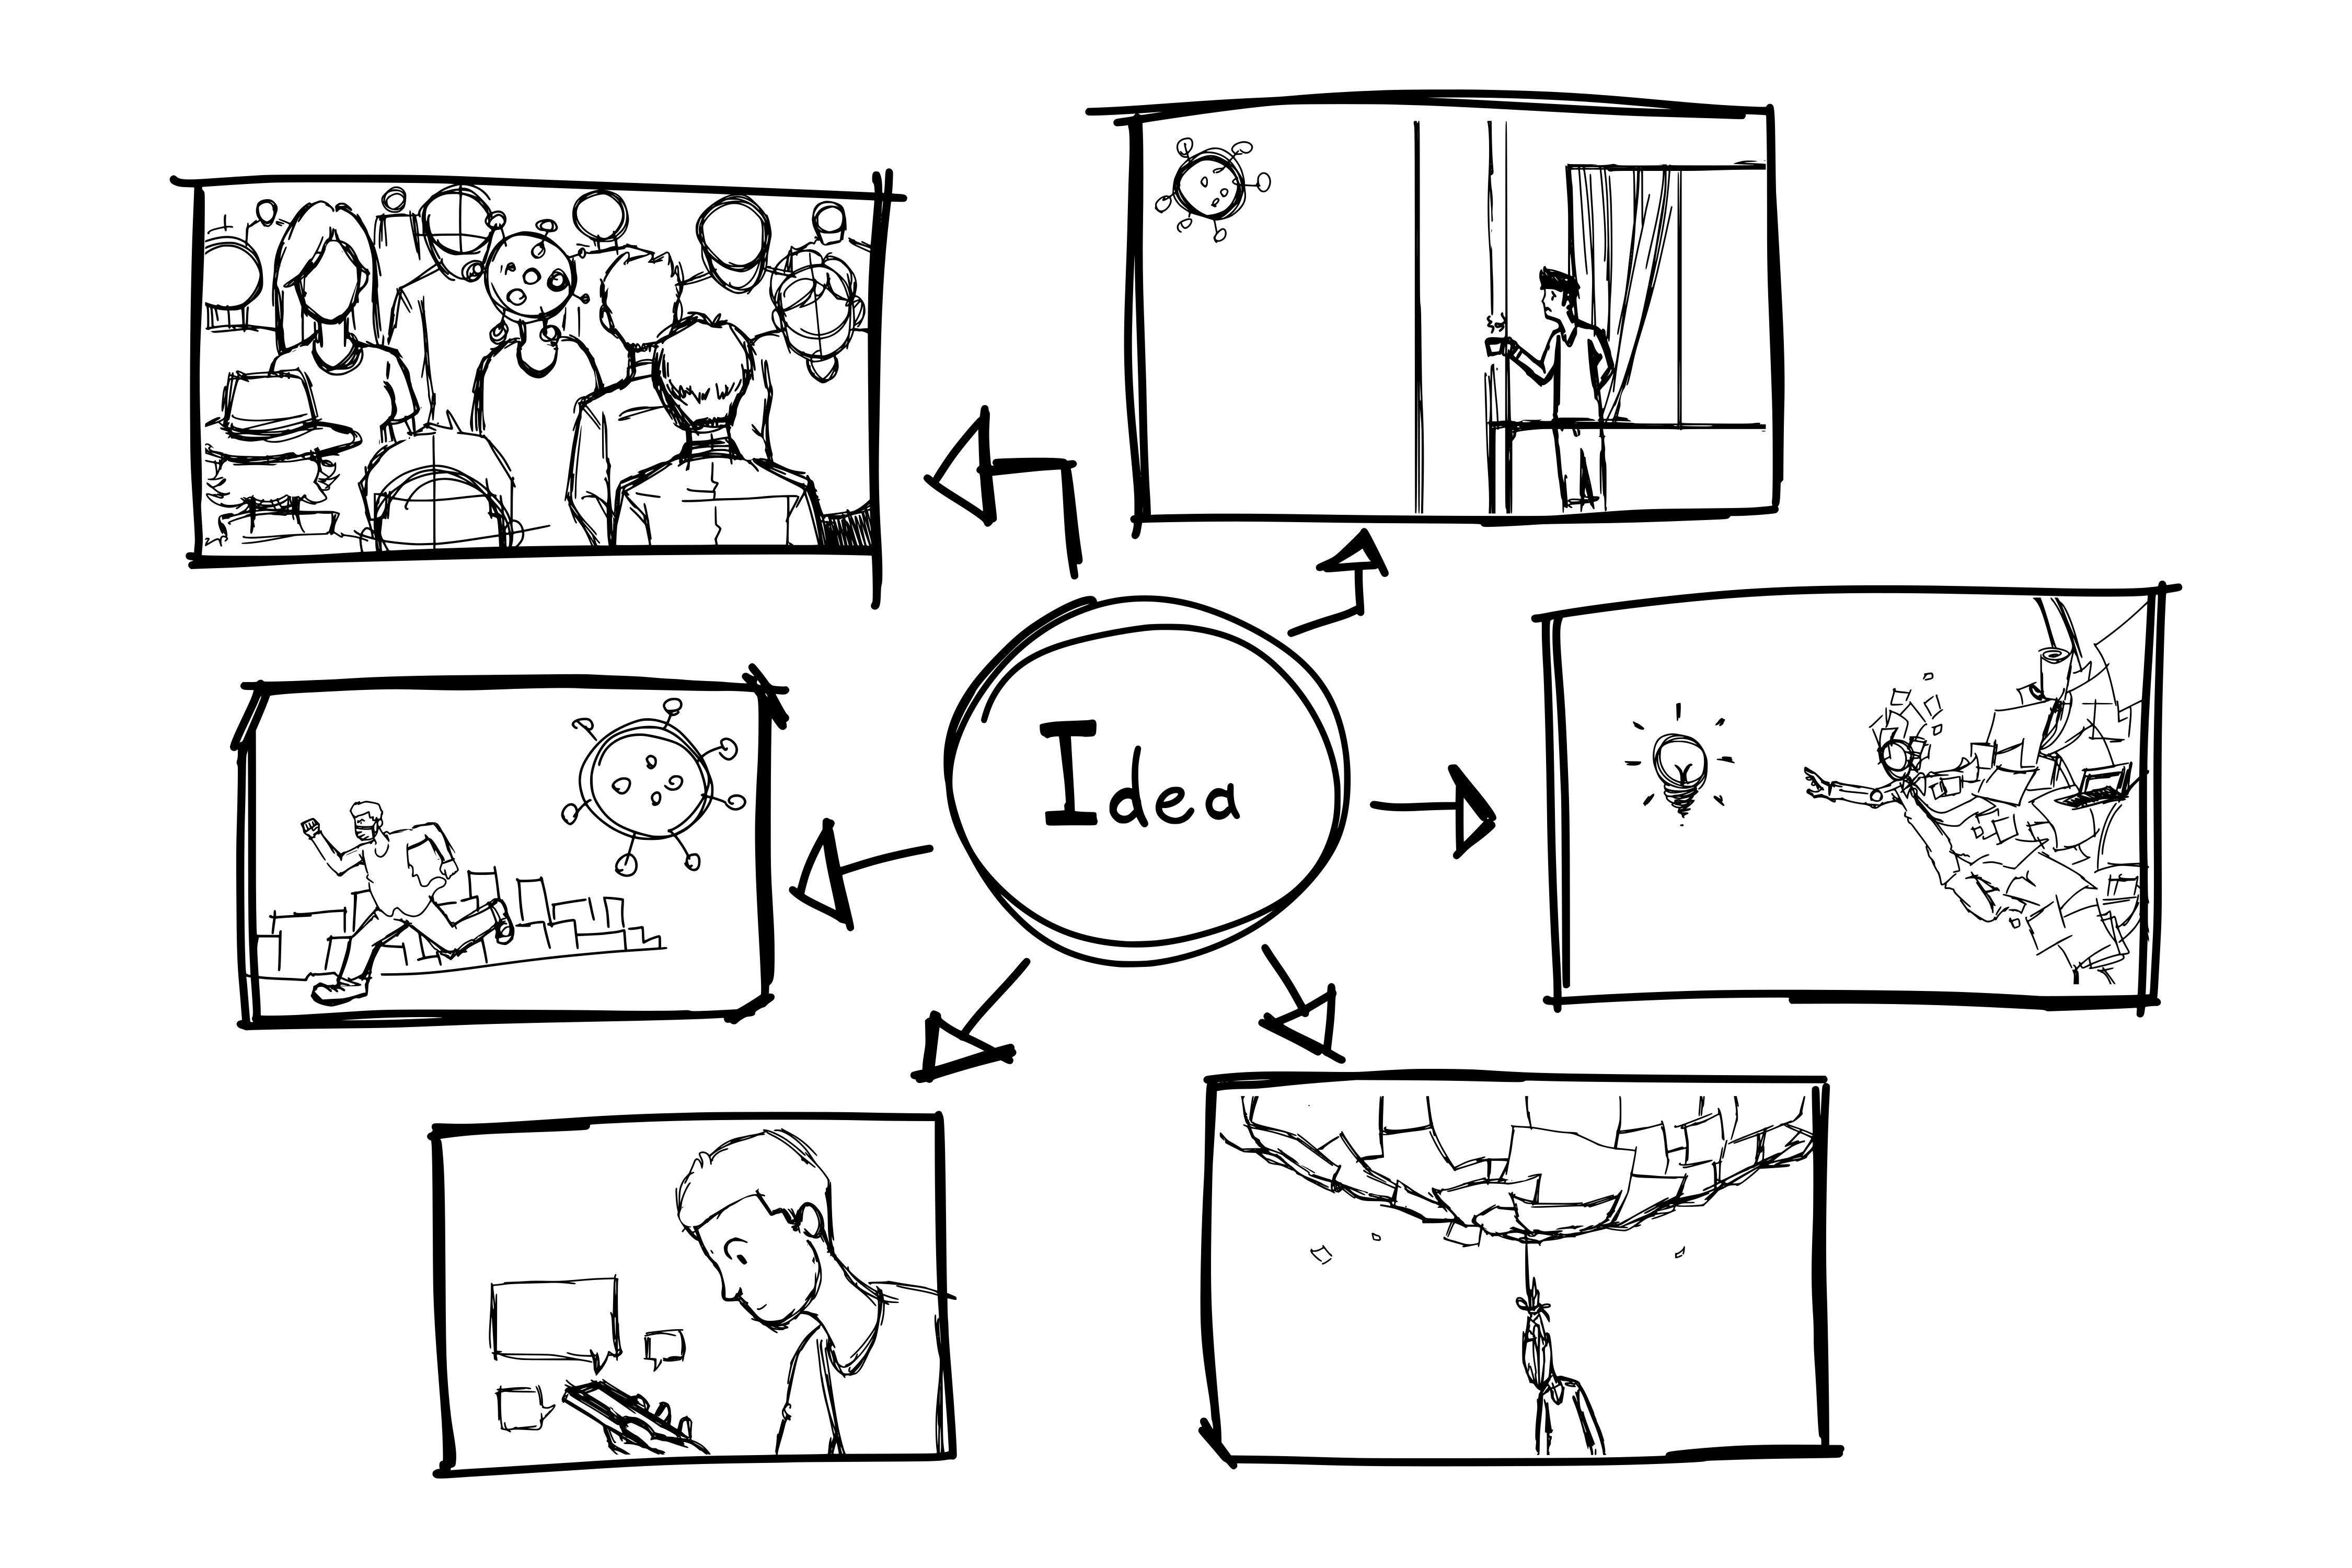 Storyboarding Tips for Starting a Script